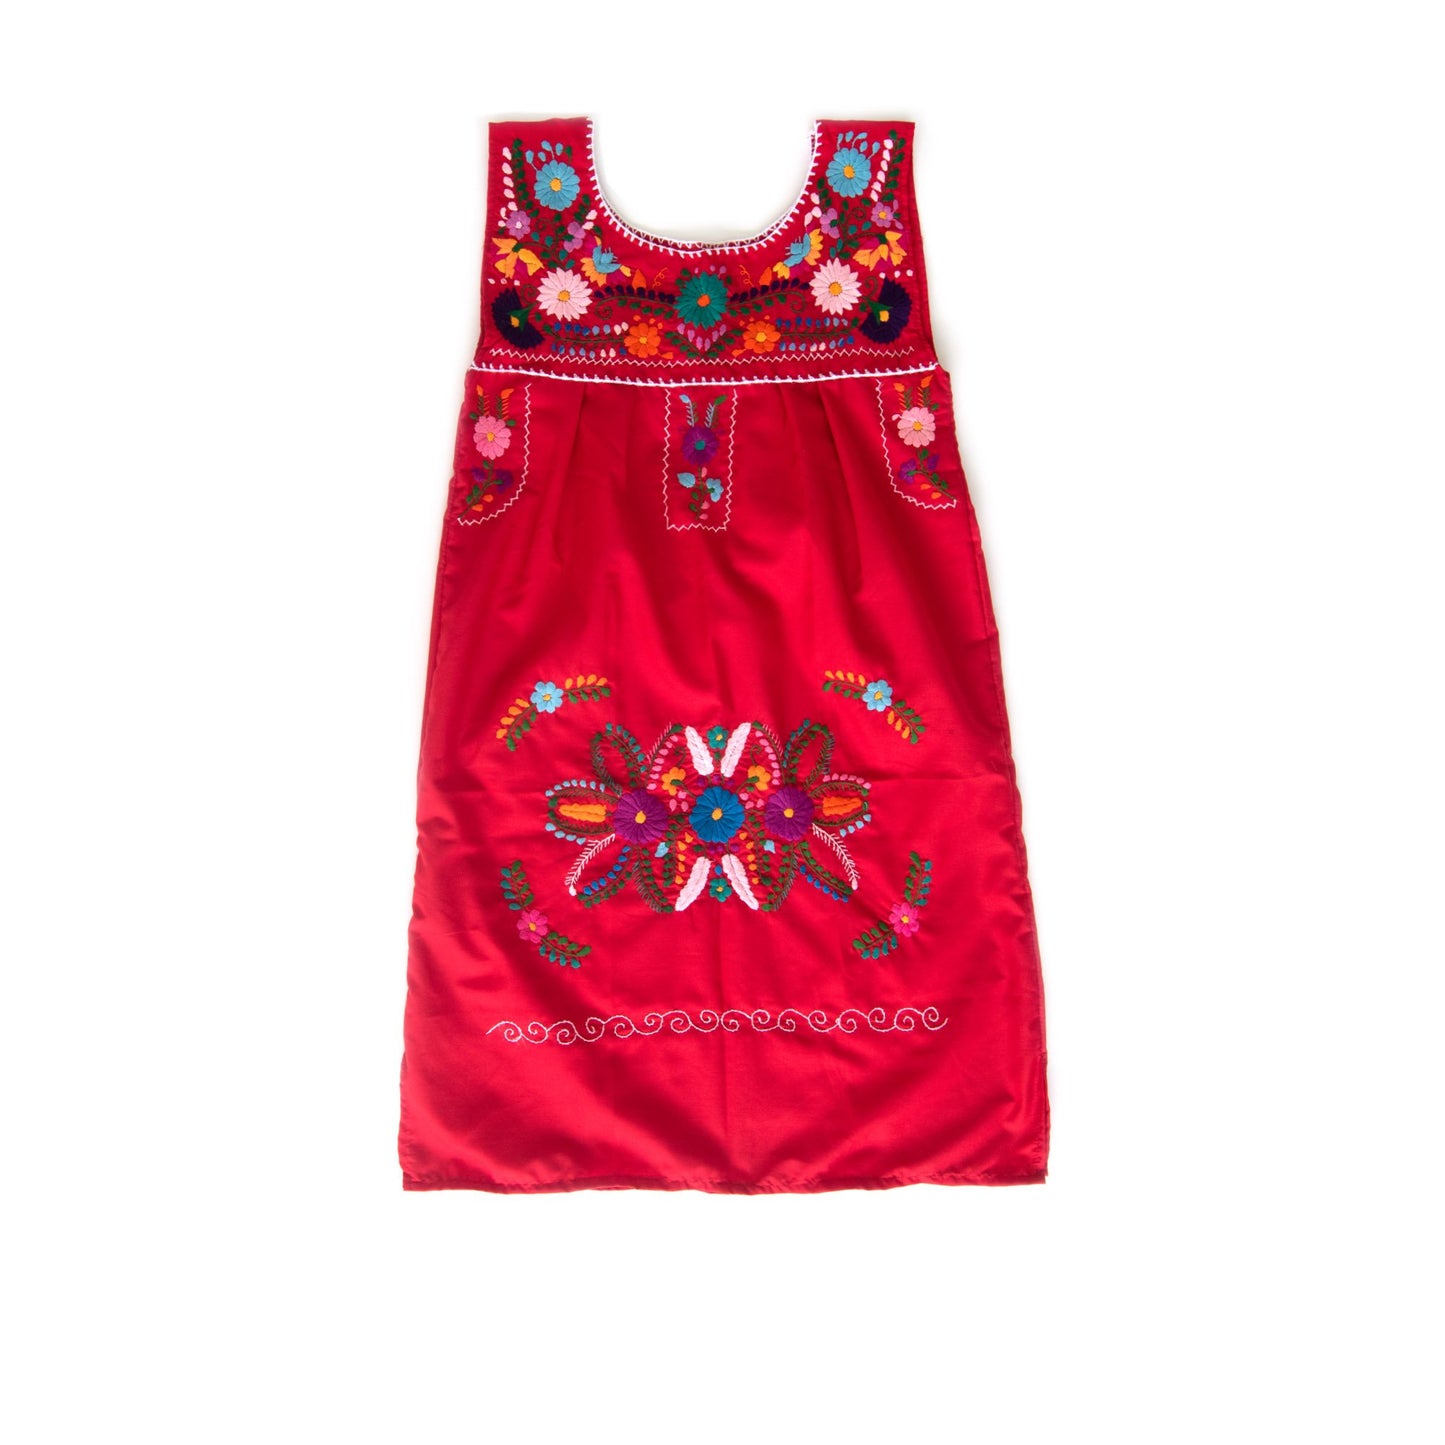 Red Vintage Boho Dress with Hand Embroidered Flowers